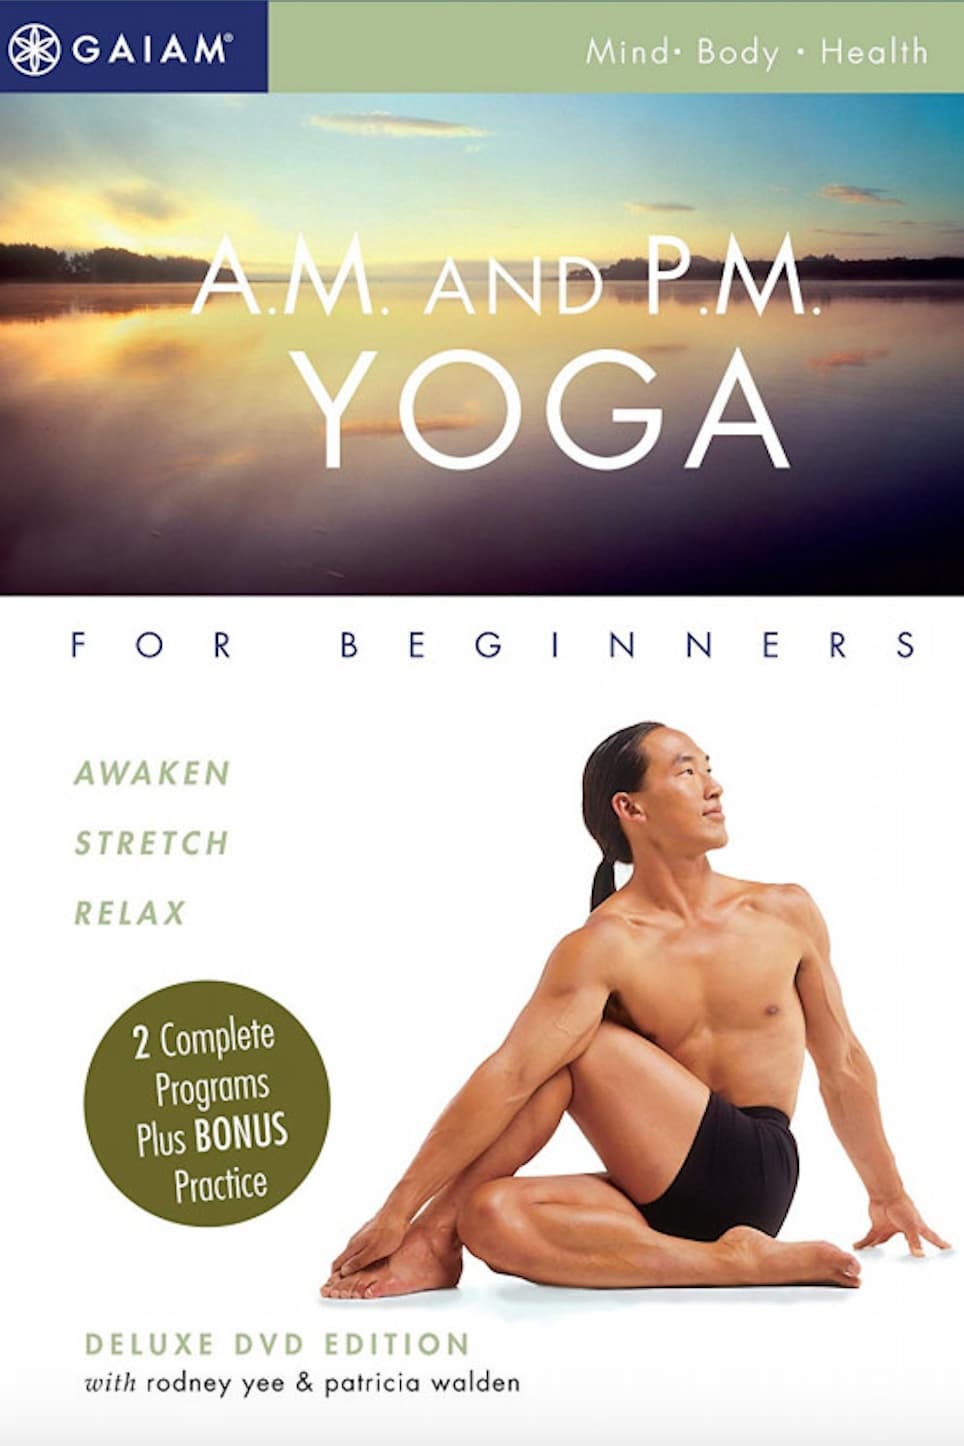 A.M. and P.M. YOGA